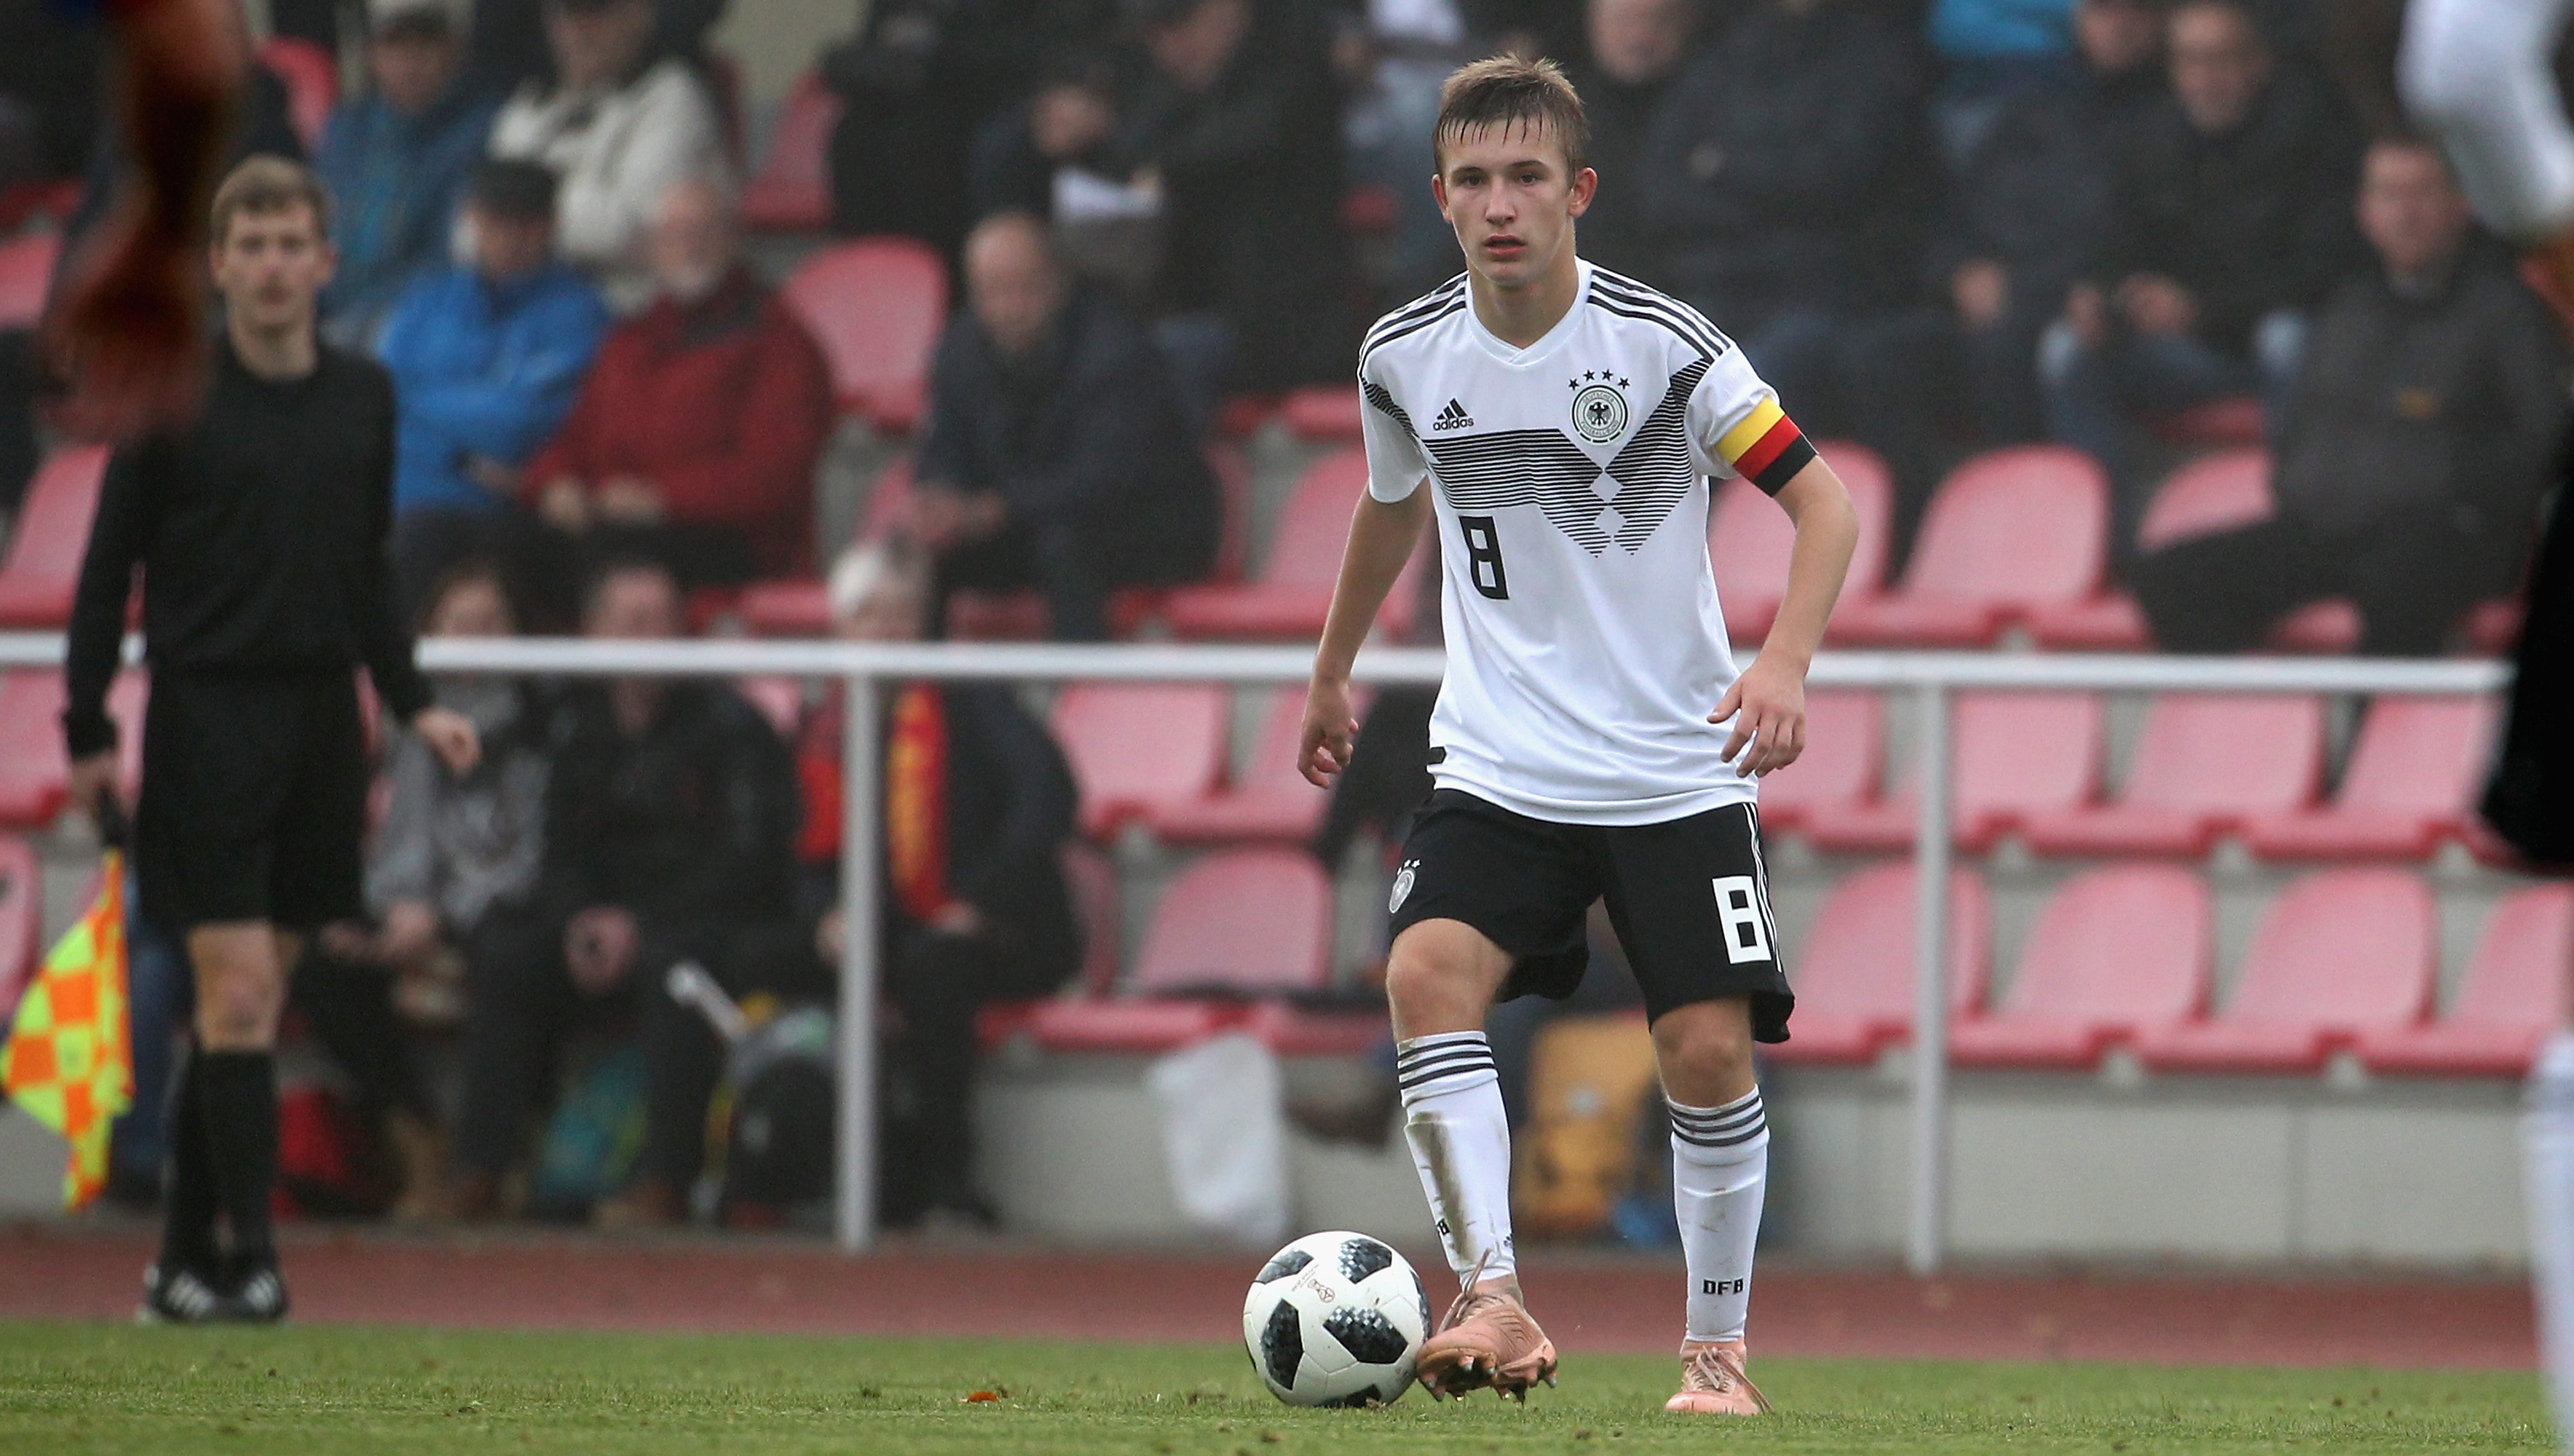 GOTHA, GERMANY - NOVEMBER 09:  Torben Rhein of Germany during the international friendly U16 match between Germany and Czech Republic  at Volkspark-Stadion on November 09, 2018 in Gotha, Germany. (Photo by Karina Hessland-Wissel/Bongarts/Getty Images)